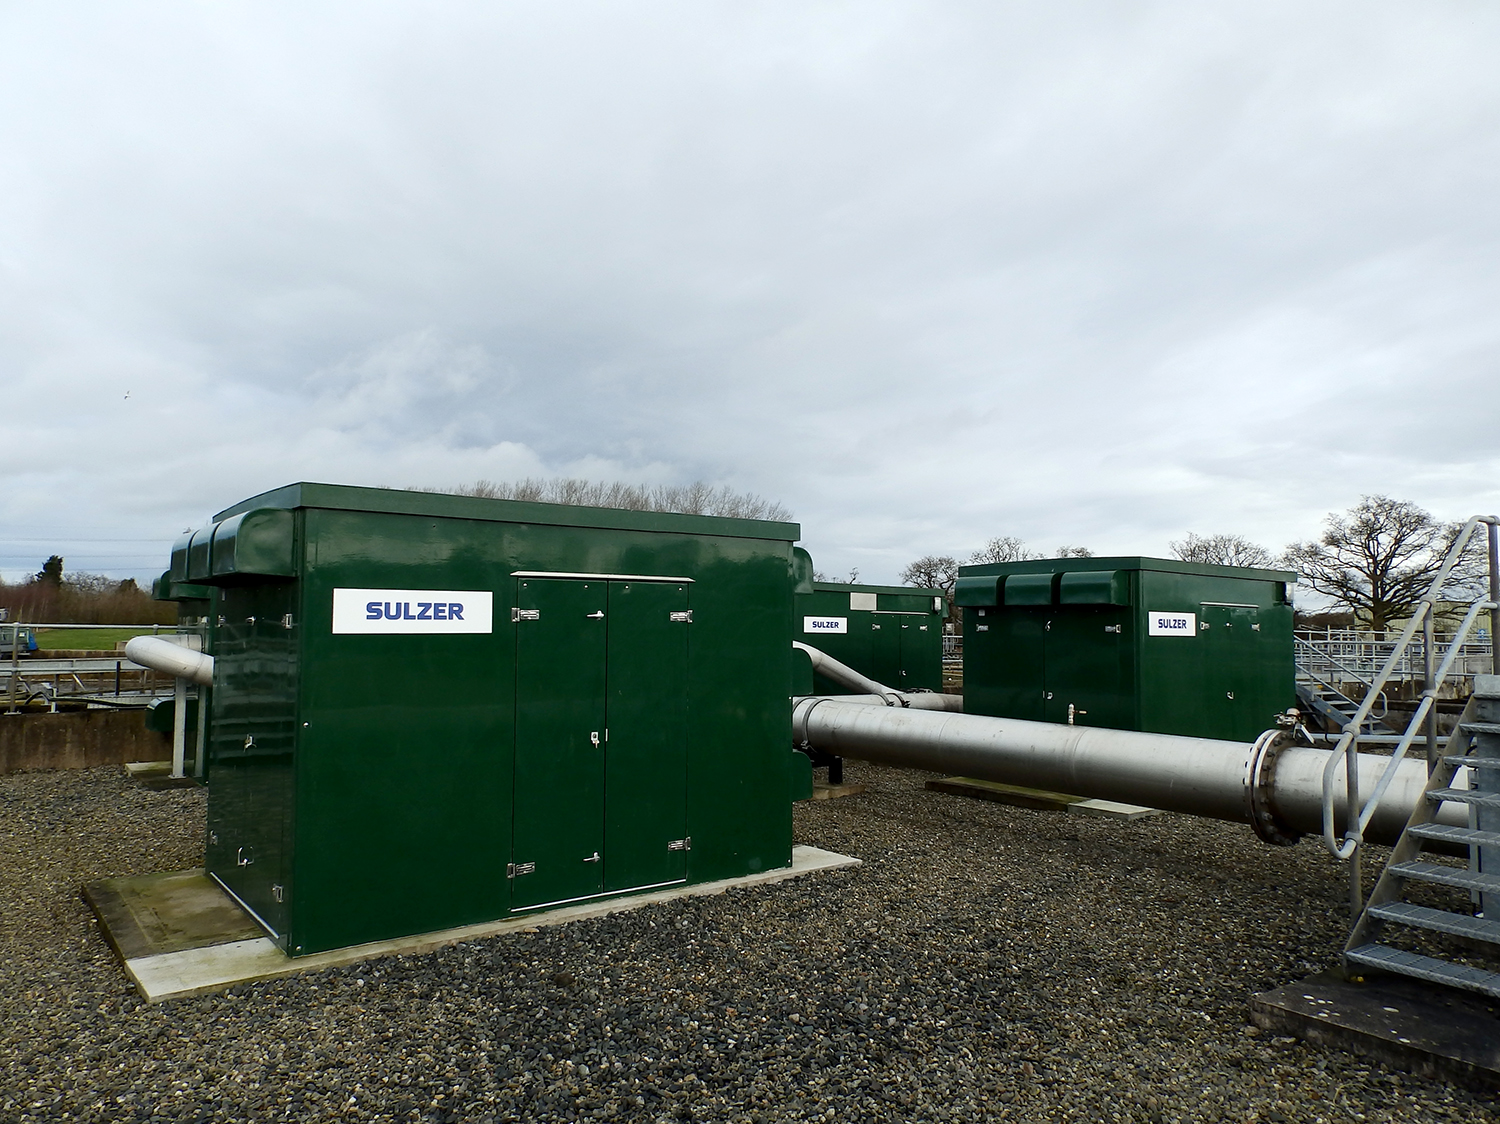 The Rushmoor facility serves more than 50’000 - four HST20-6000-1-125-40 turbocompressors were installed as replacements for ageing inefficient and unreliable blowers